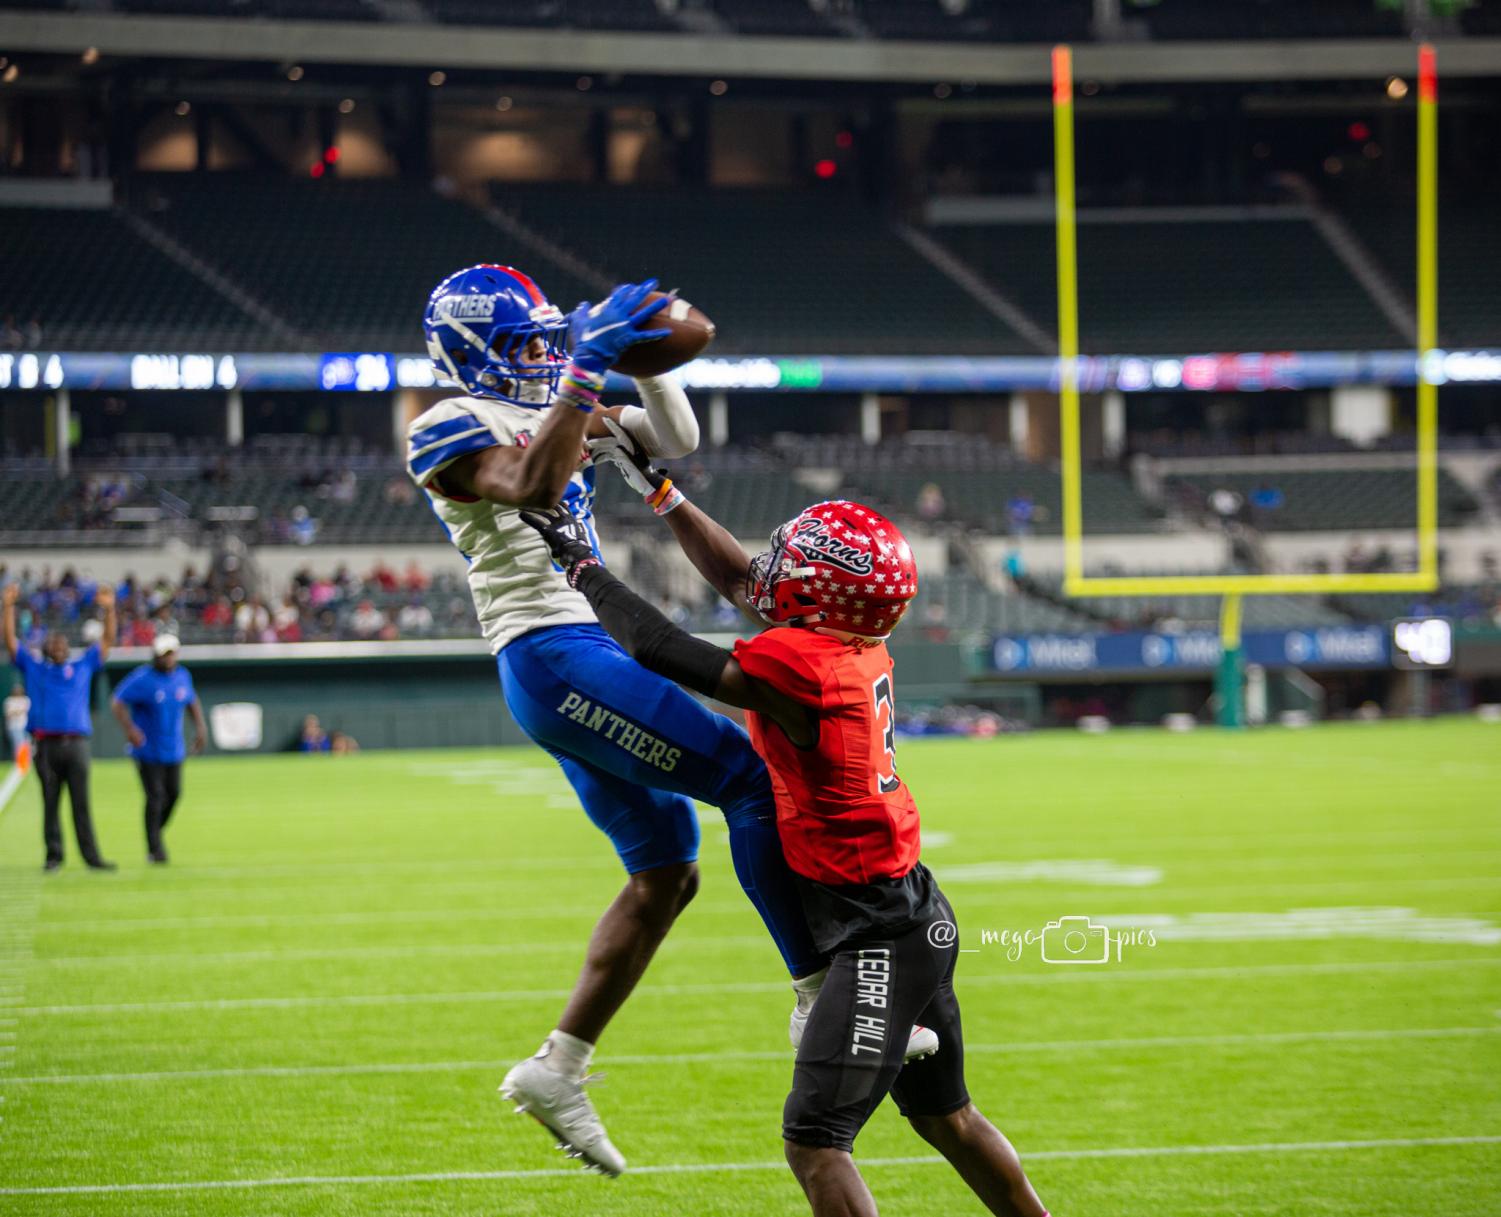 Dakorien Moore goes up to make the touchdown catch against Cedar Hill at Globe Life Park.